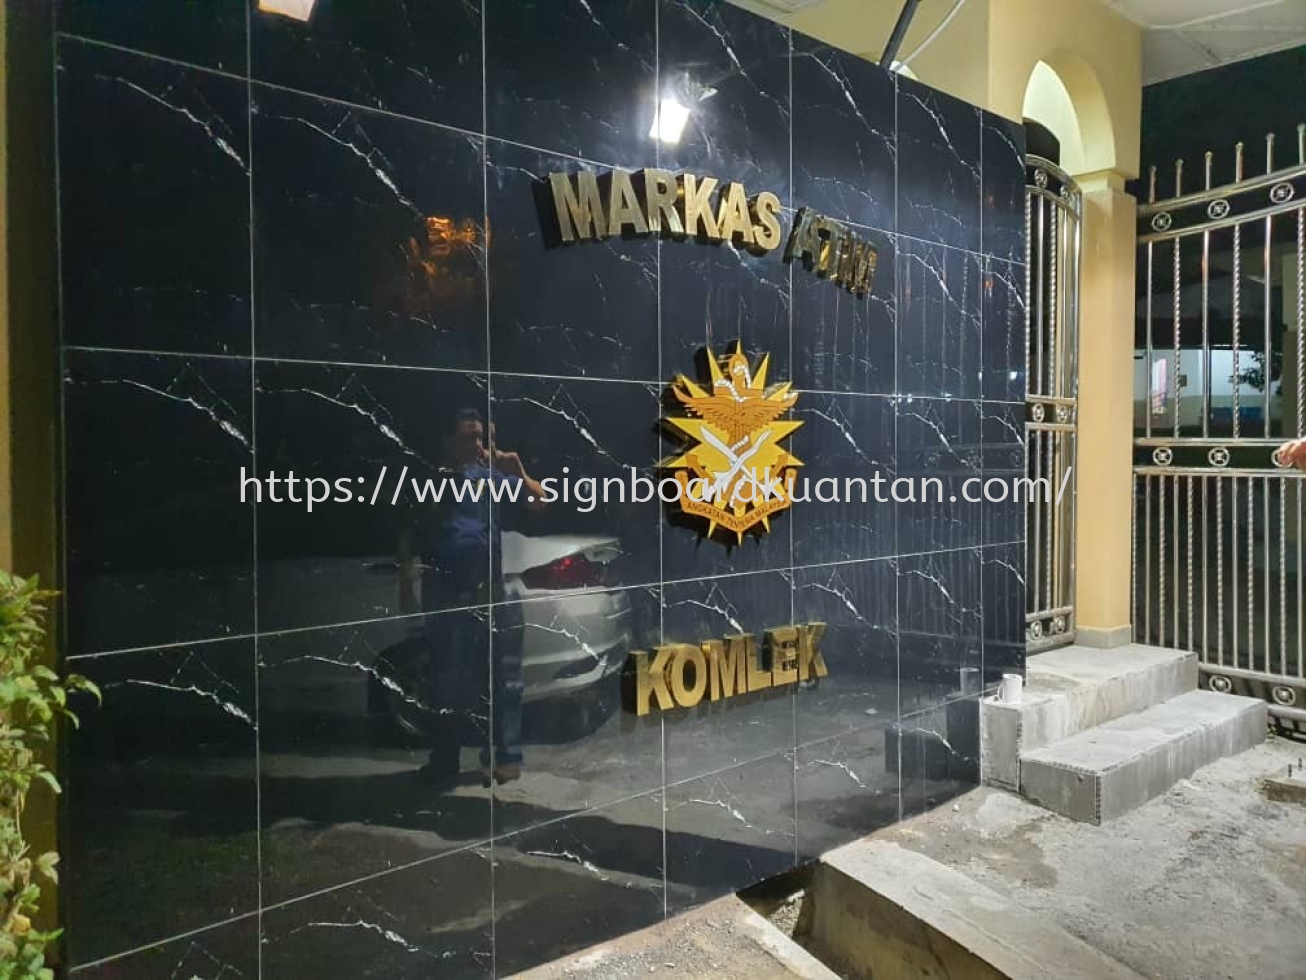 MARKAS ATM KOMLEX OUTDOOR STAINLESS STEEL 3D LETTERING SIGNAGE AT KUANTAN AIR PUTIH 